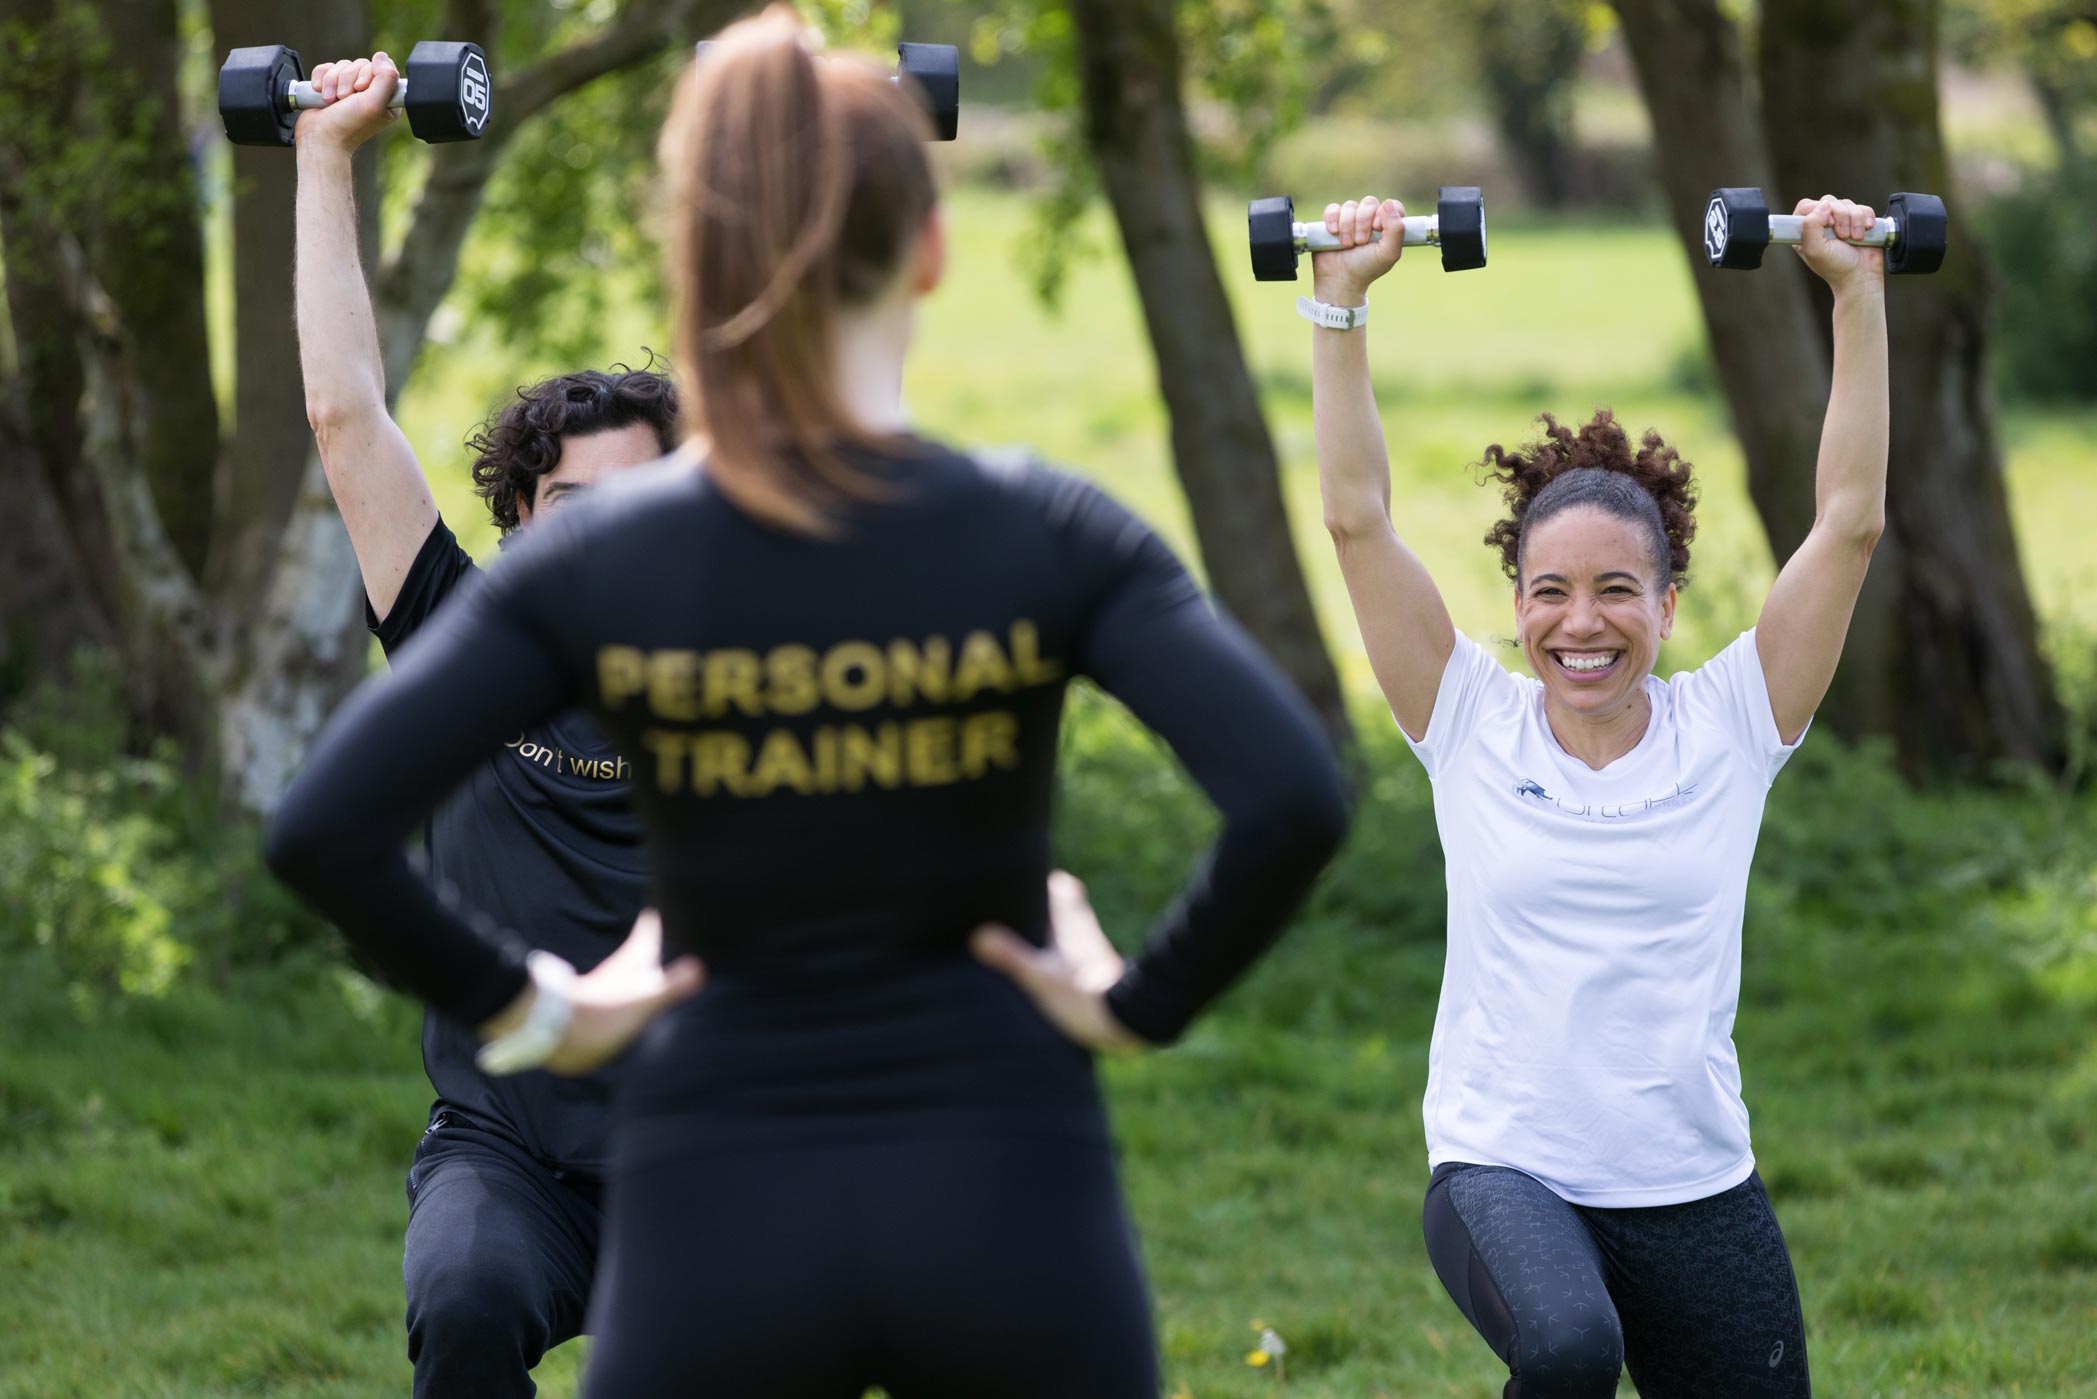 A personal trainer watches her clients in the park whilst being photographed